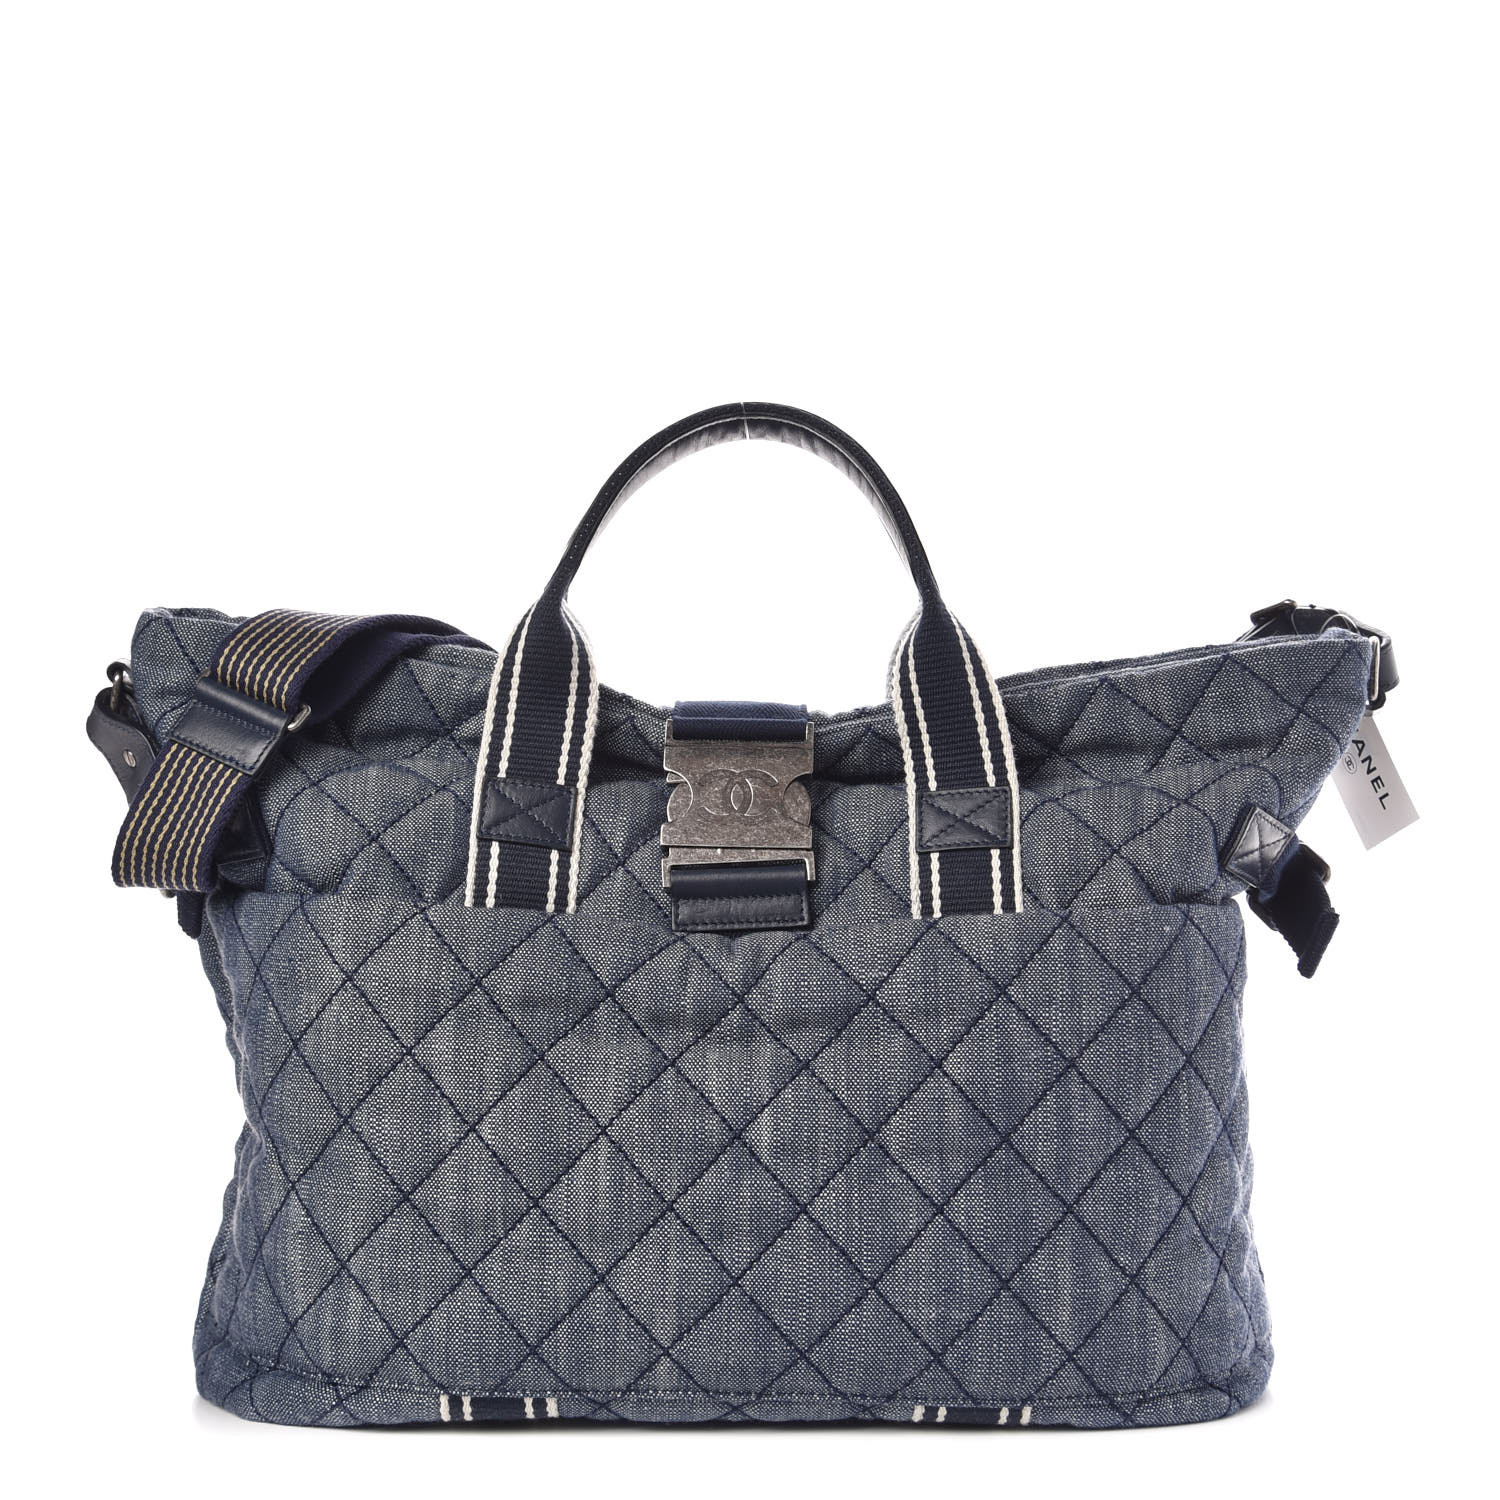 CHANEL Denim Quilted Large Shopping Bag Navy White 365871